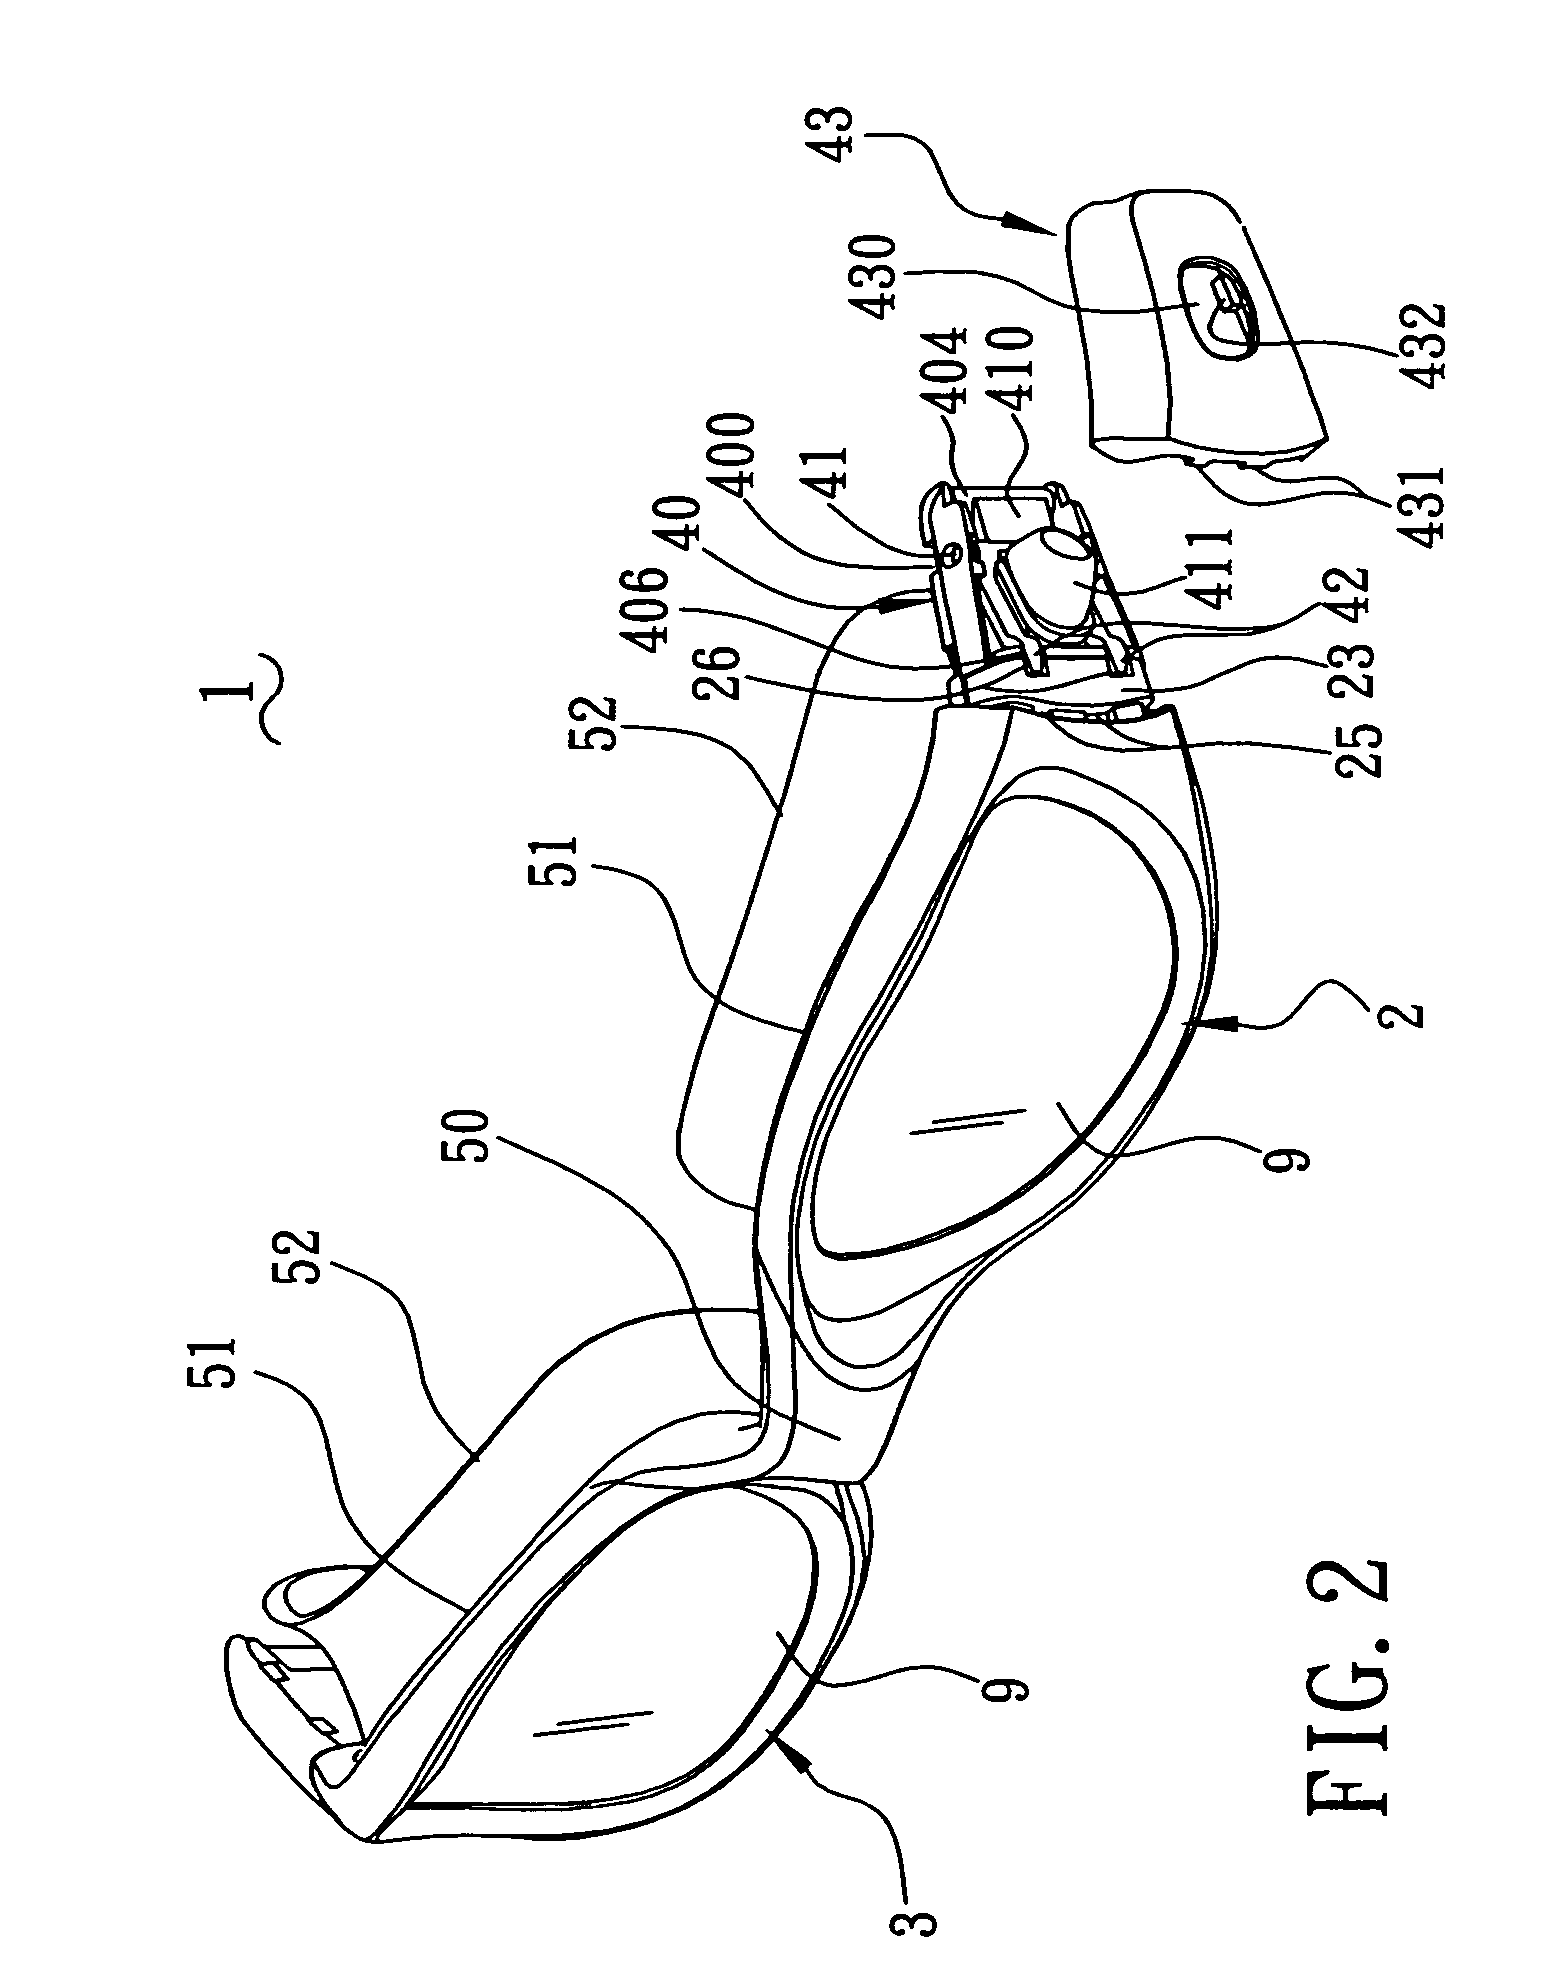 Swimming goggles with strap adjusting device